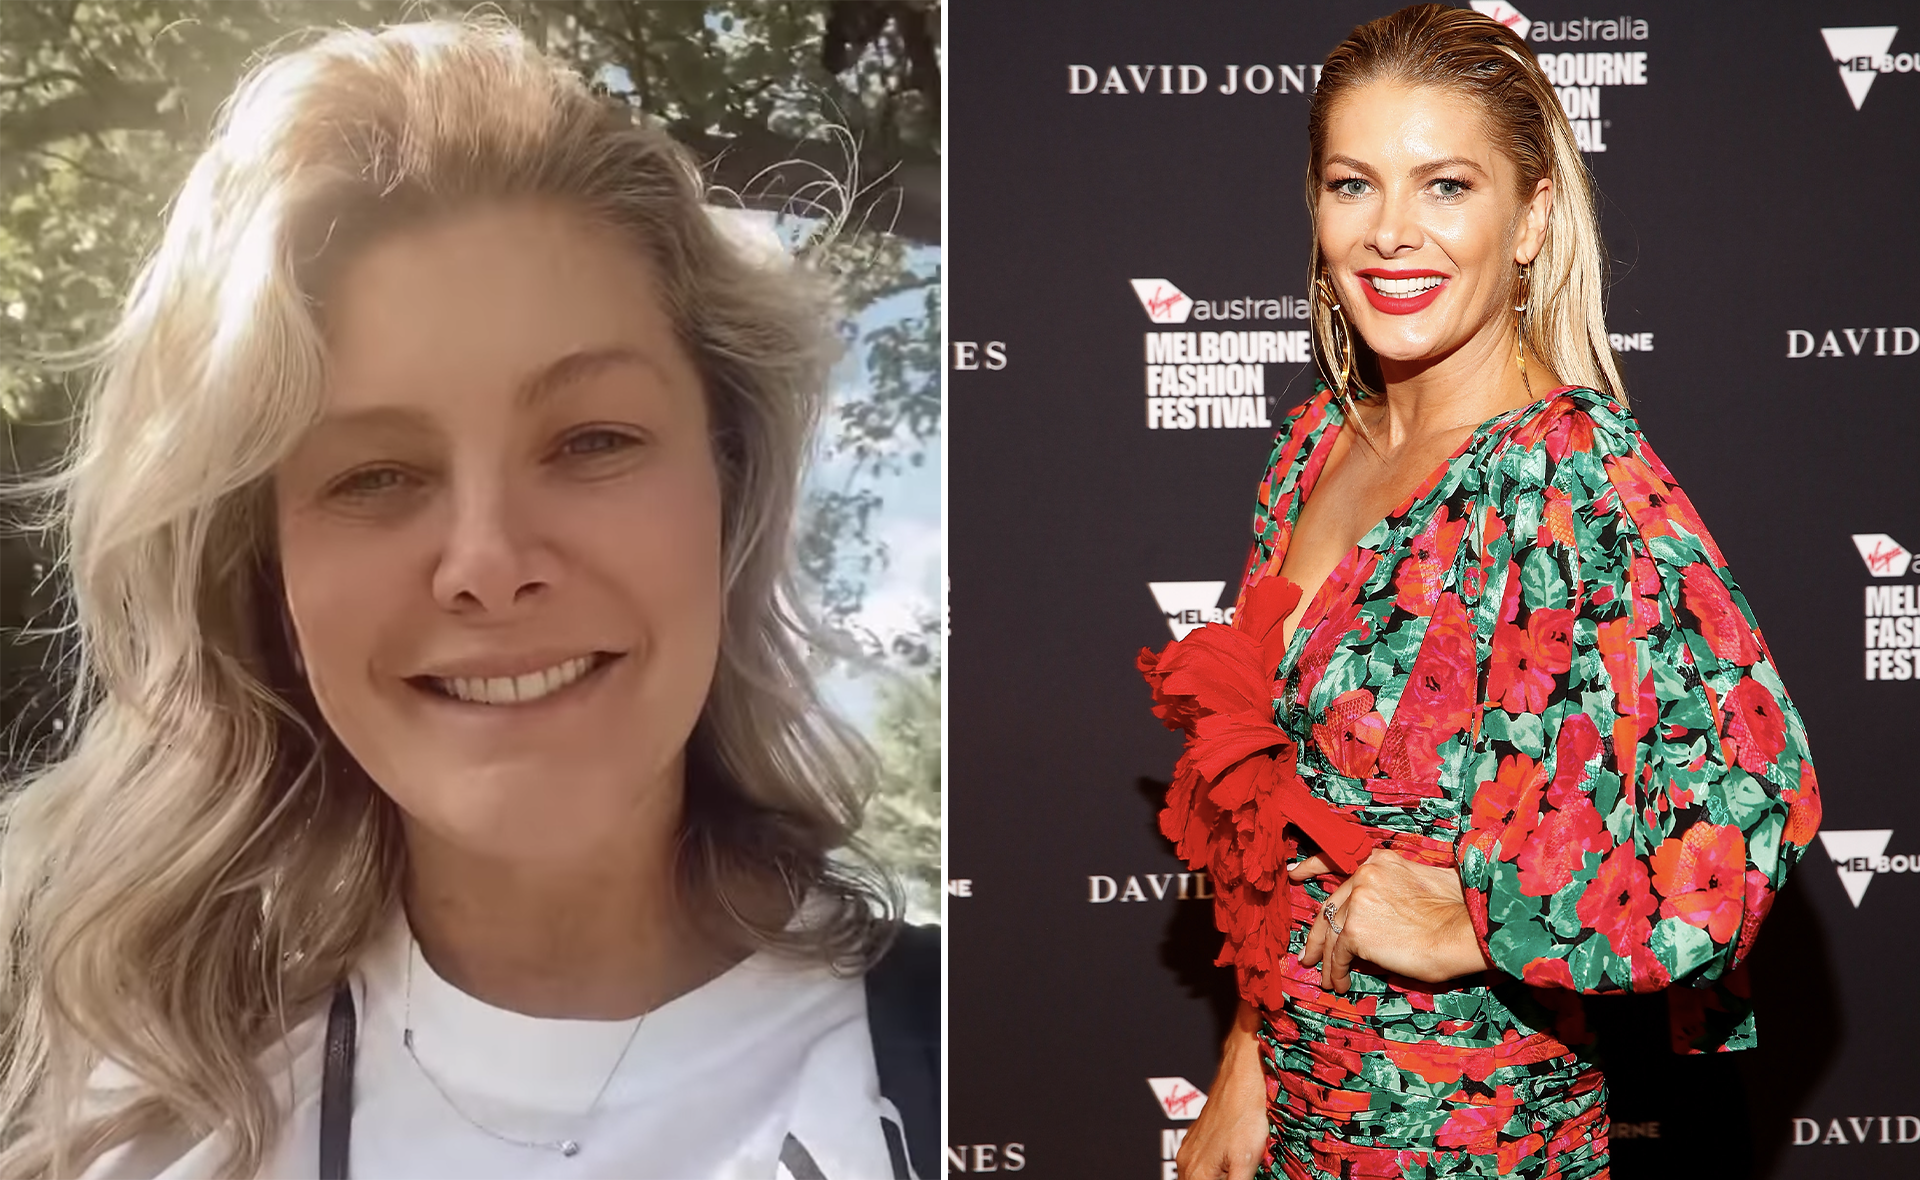 Natalie Bassingthwaighte shares her excitement as she finishes 14-day hotel quarantine in Sydney: “That was a ride and a half”